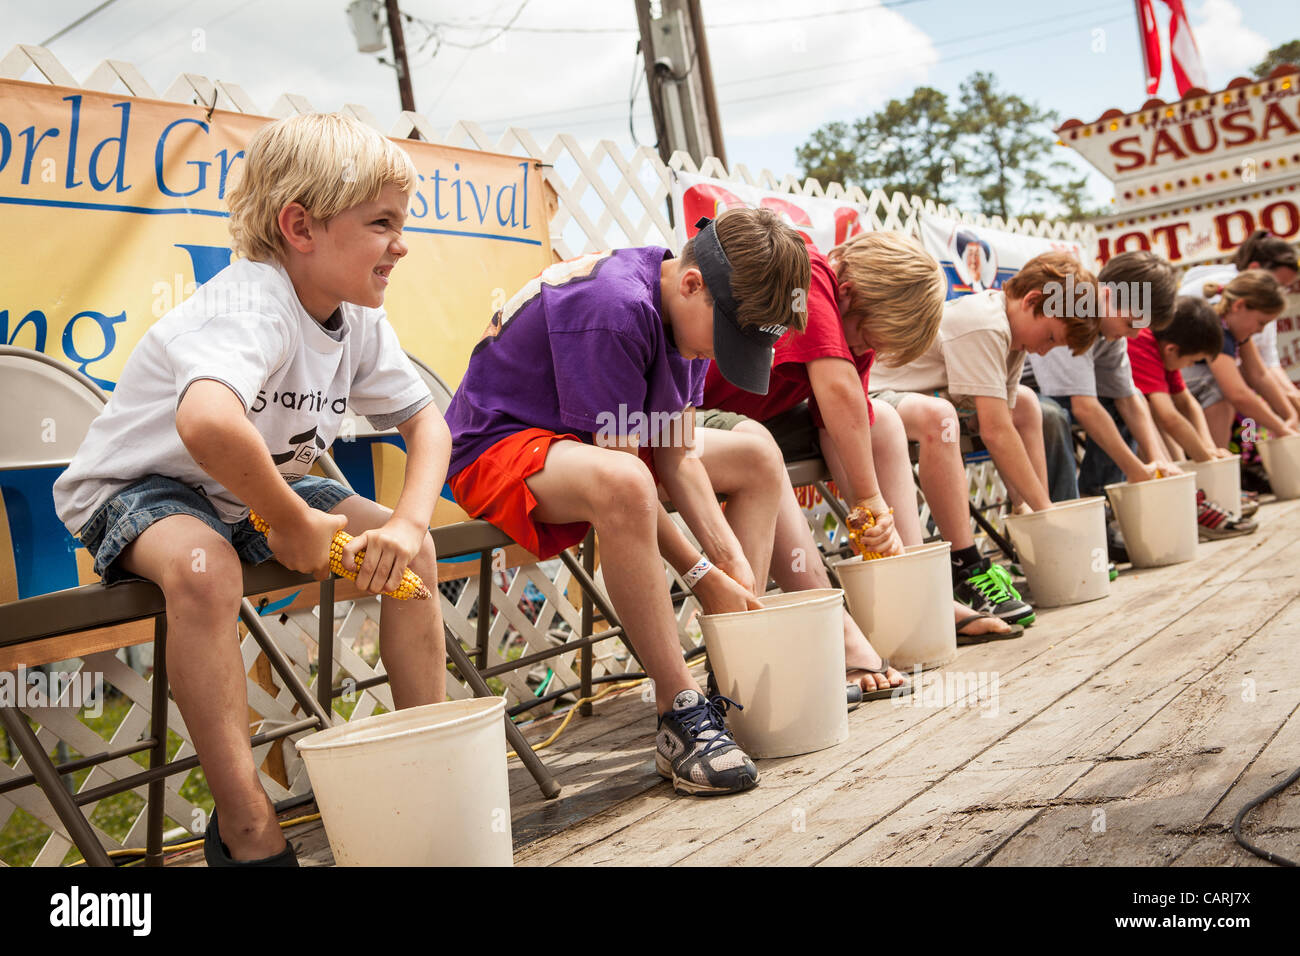 Young competitors race to husk the most corn at the World Grits Festival April 14, 2012 in St. George, SC. The festival celebrates the southern love for the sticky corn porridge Stock Photo